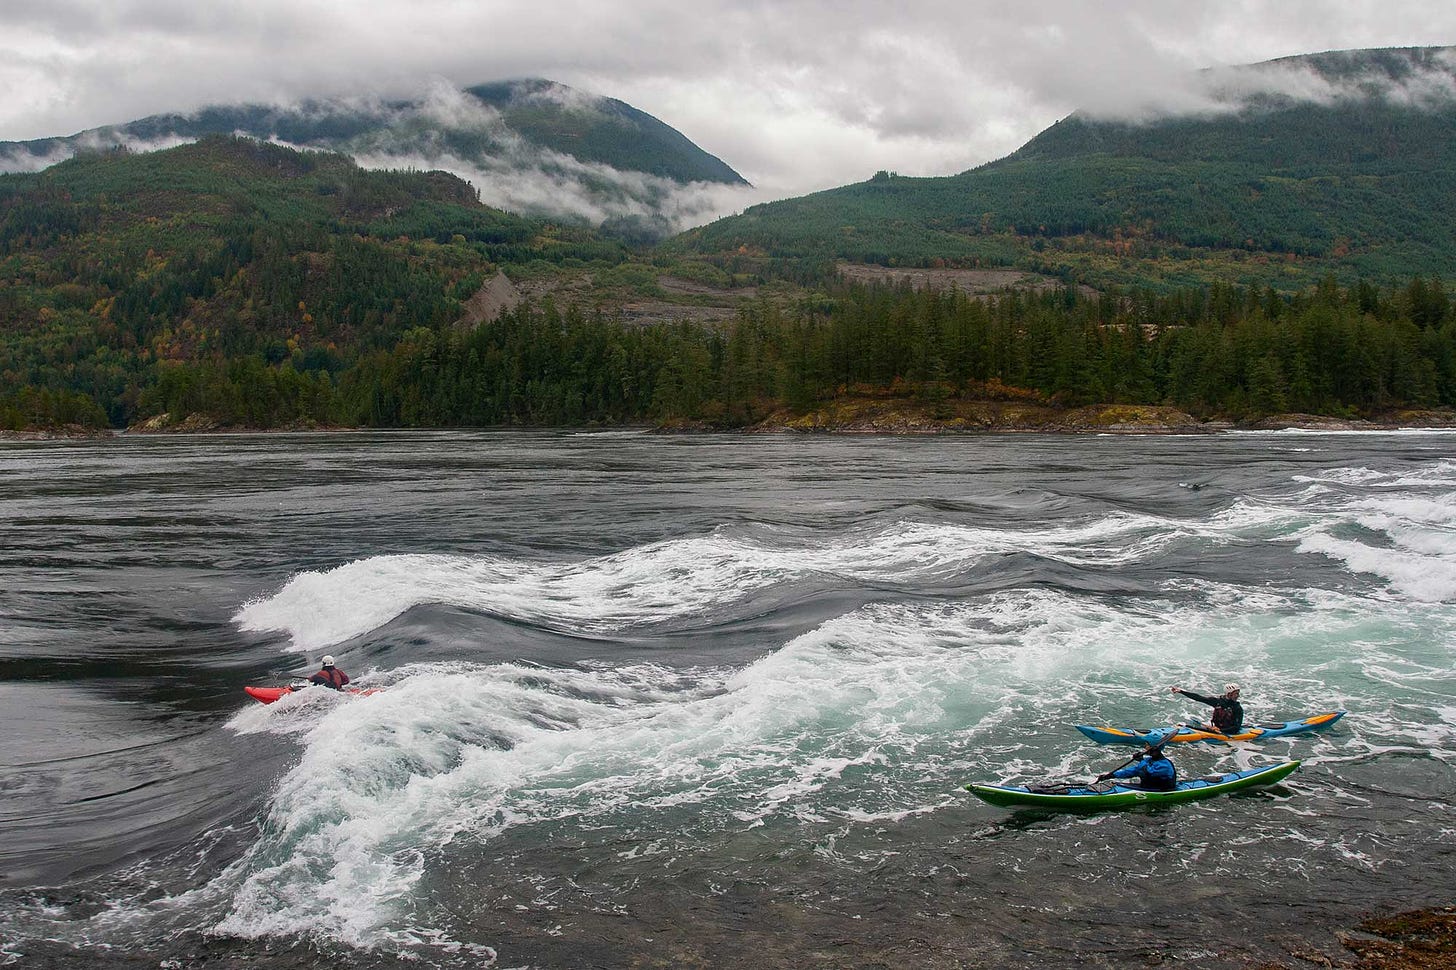 kayakers play in the rapids at Skookumchuck Narrows on a misty morning in early fall